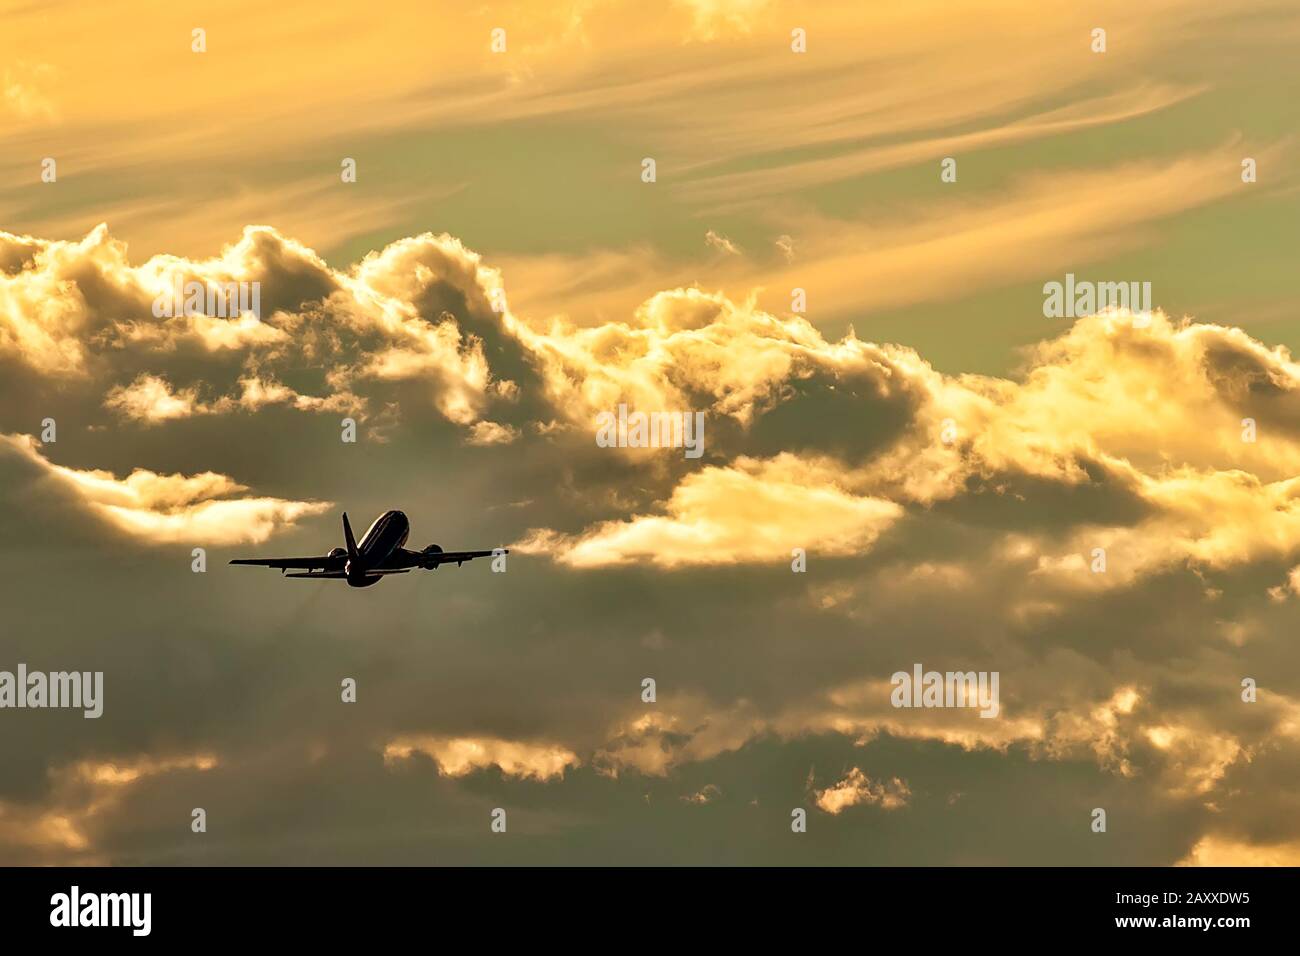 Silhouette of jet airplane flying towards the clouds at sunset. Stock Photo